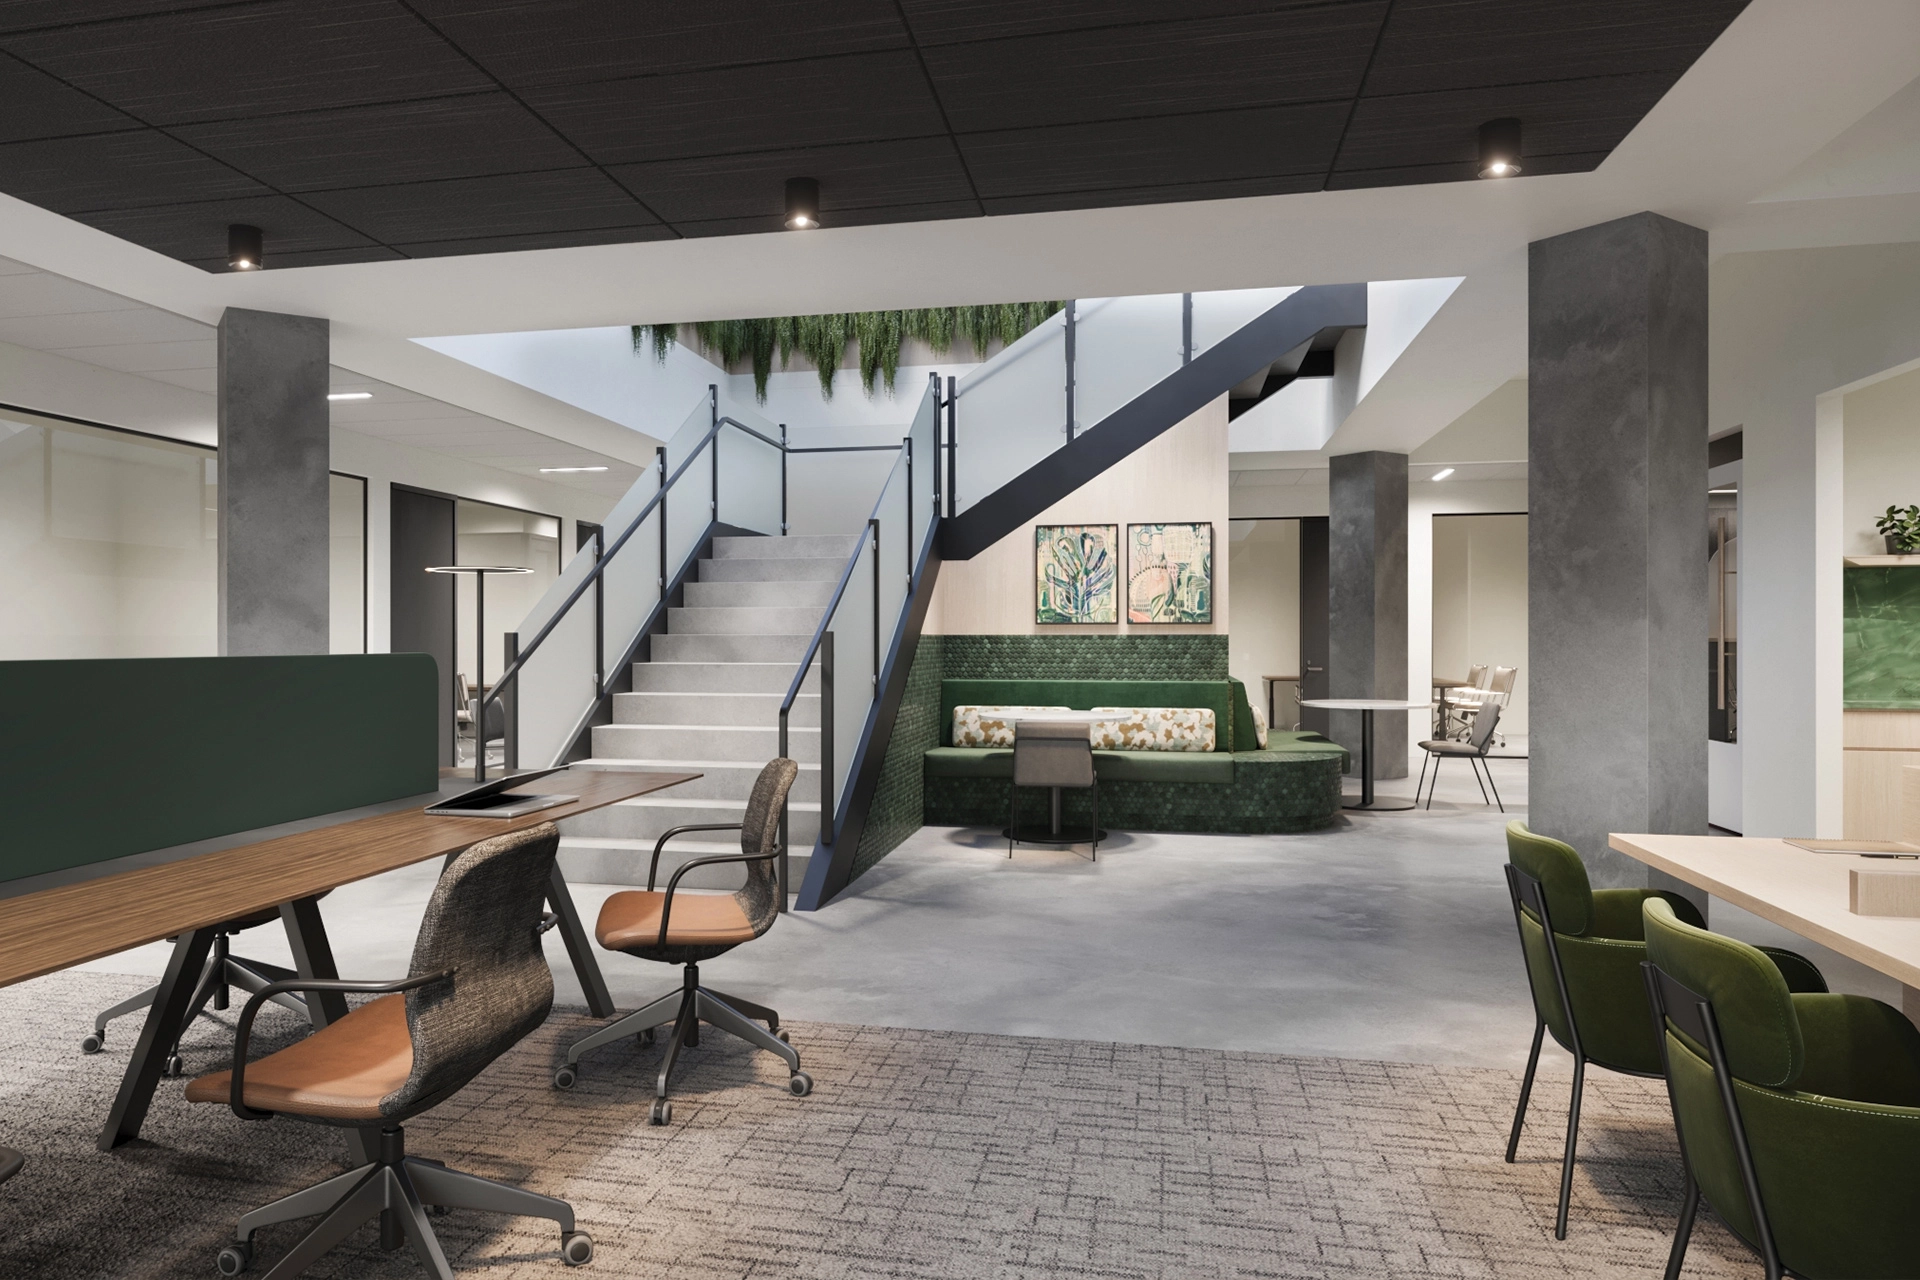 A rendering of an office workspace with green chairs and stairs.